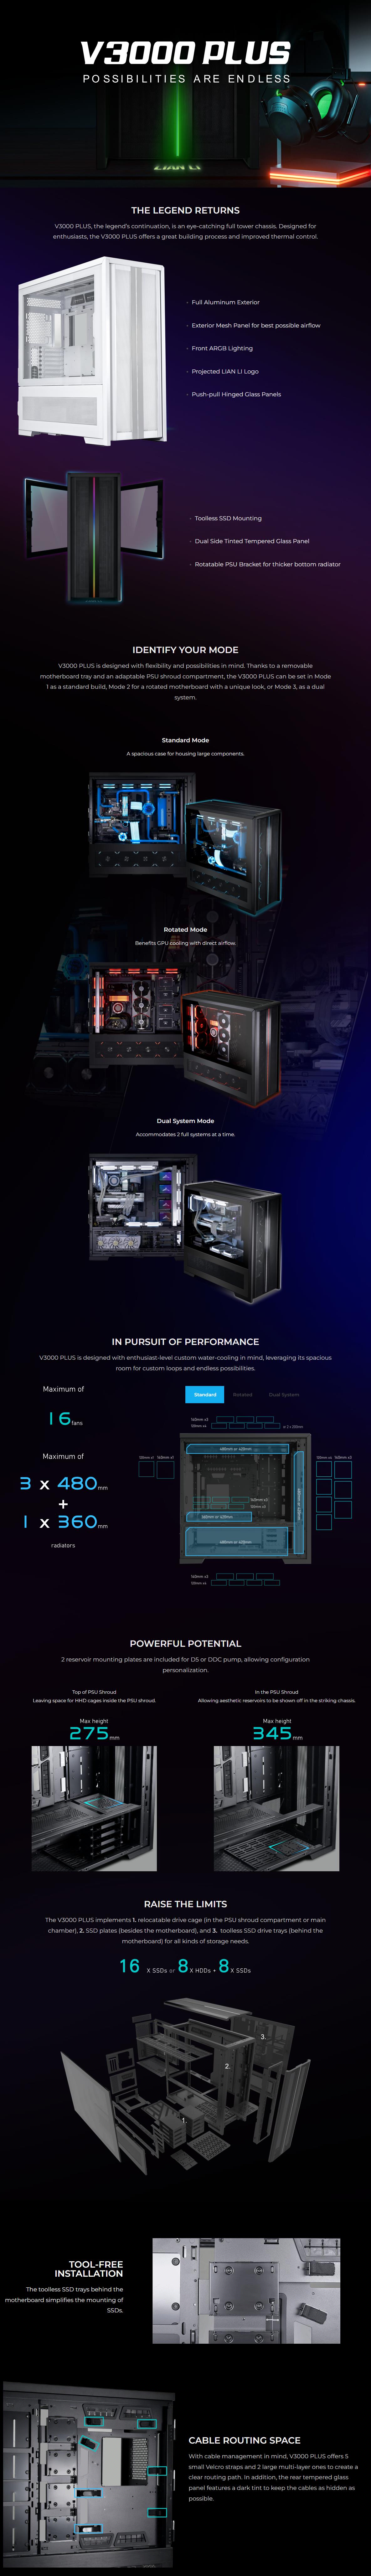 A large marketing image providing additional information about the product Lian Li V3000 Plus Full Tower Case - White - Additional alt info not provided